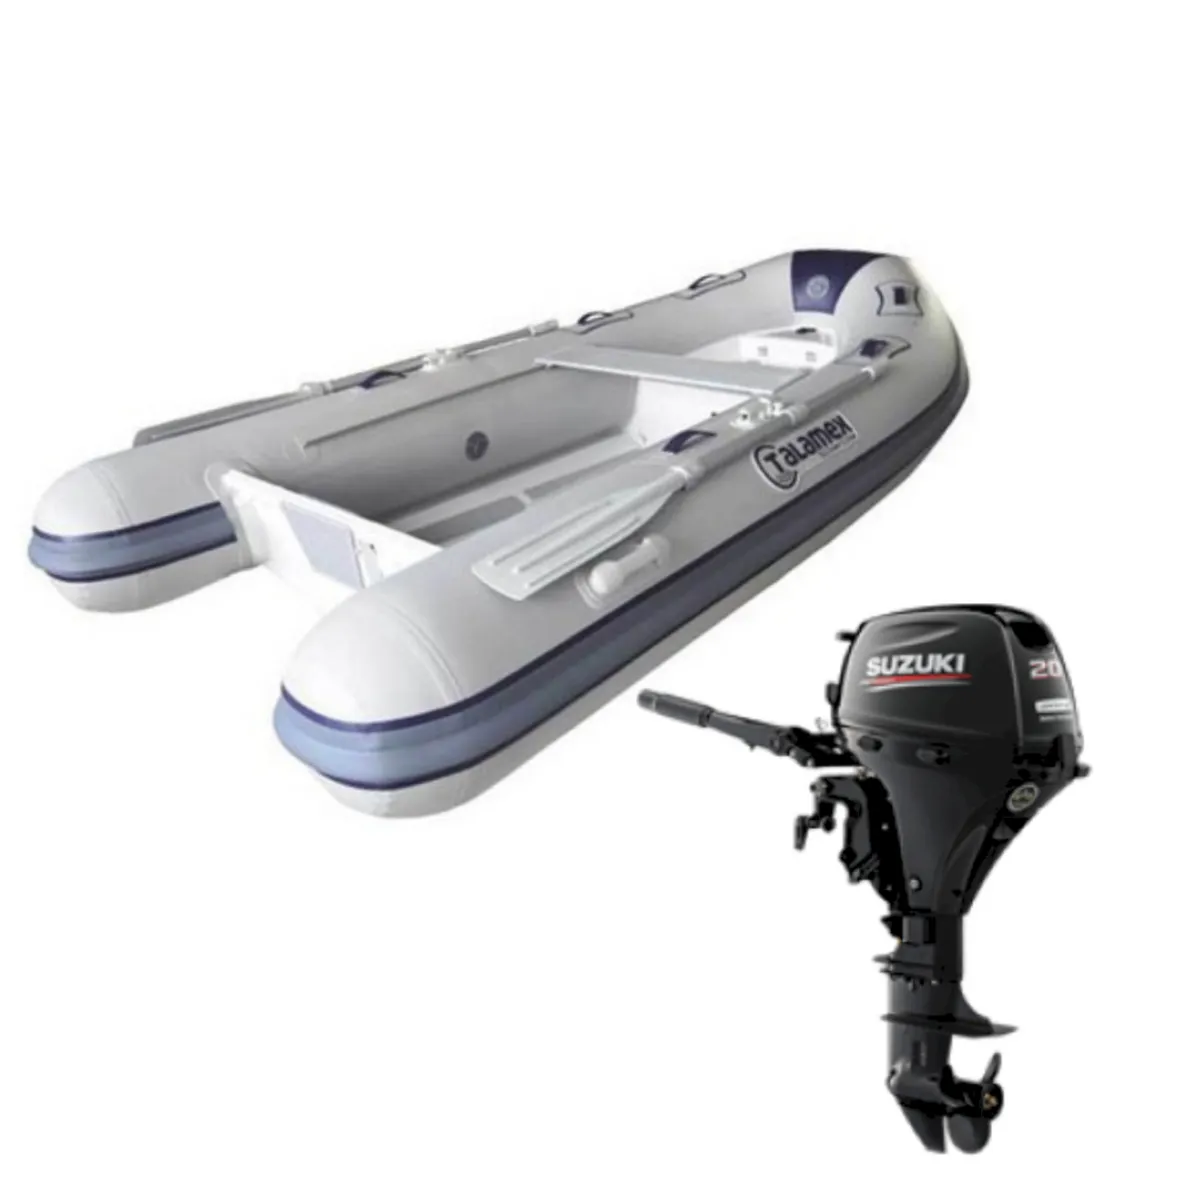 RIB & Suzuki Outboard Package Deals - Image 1